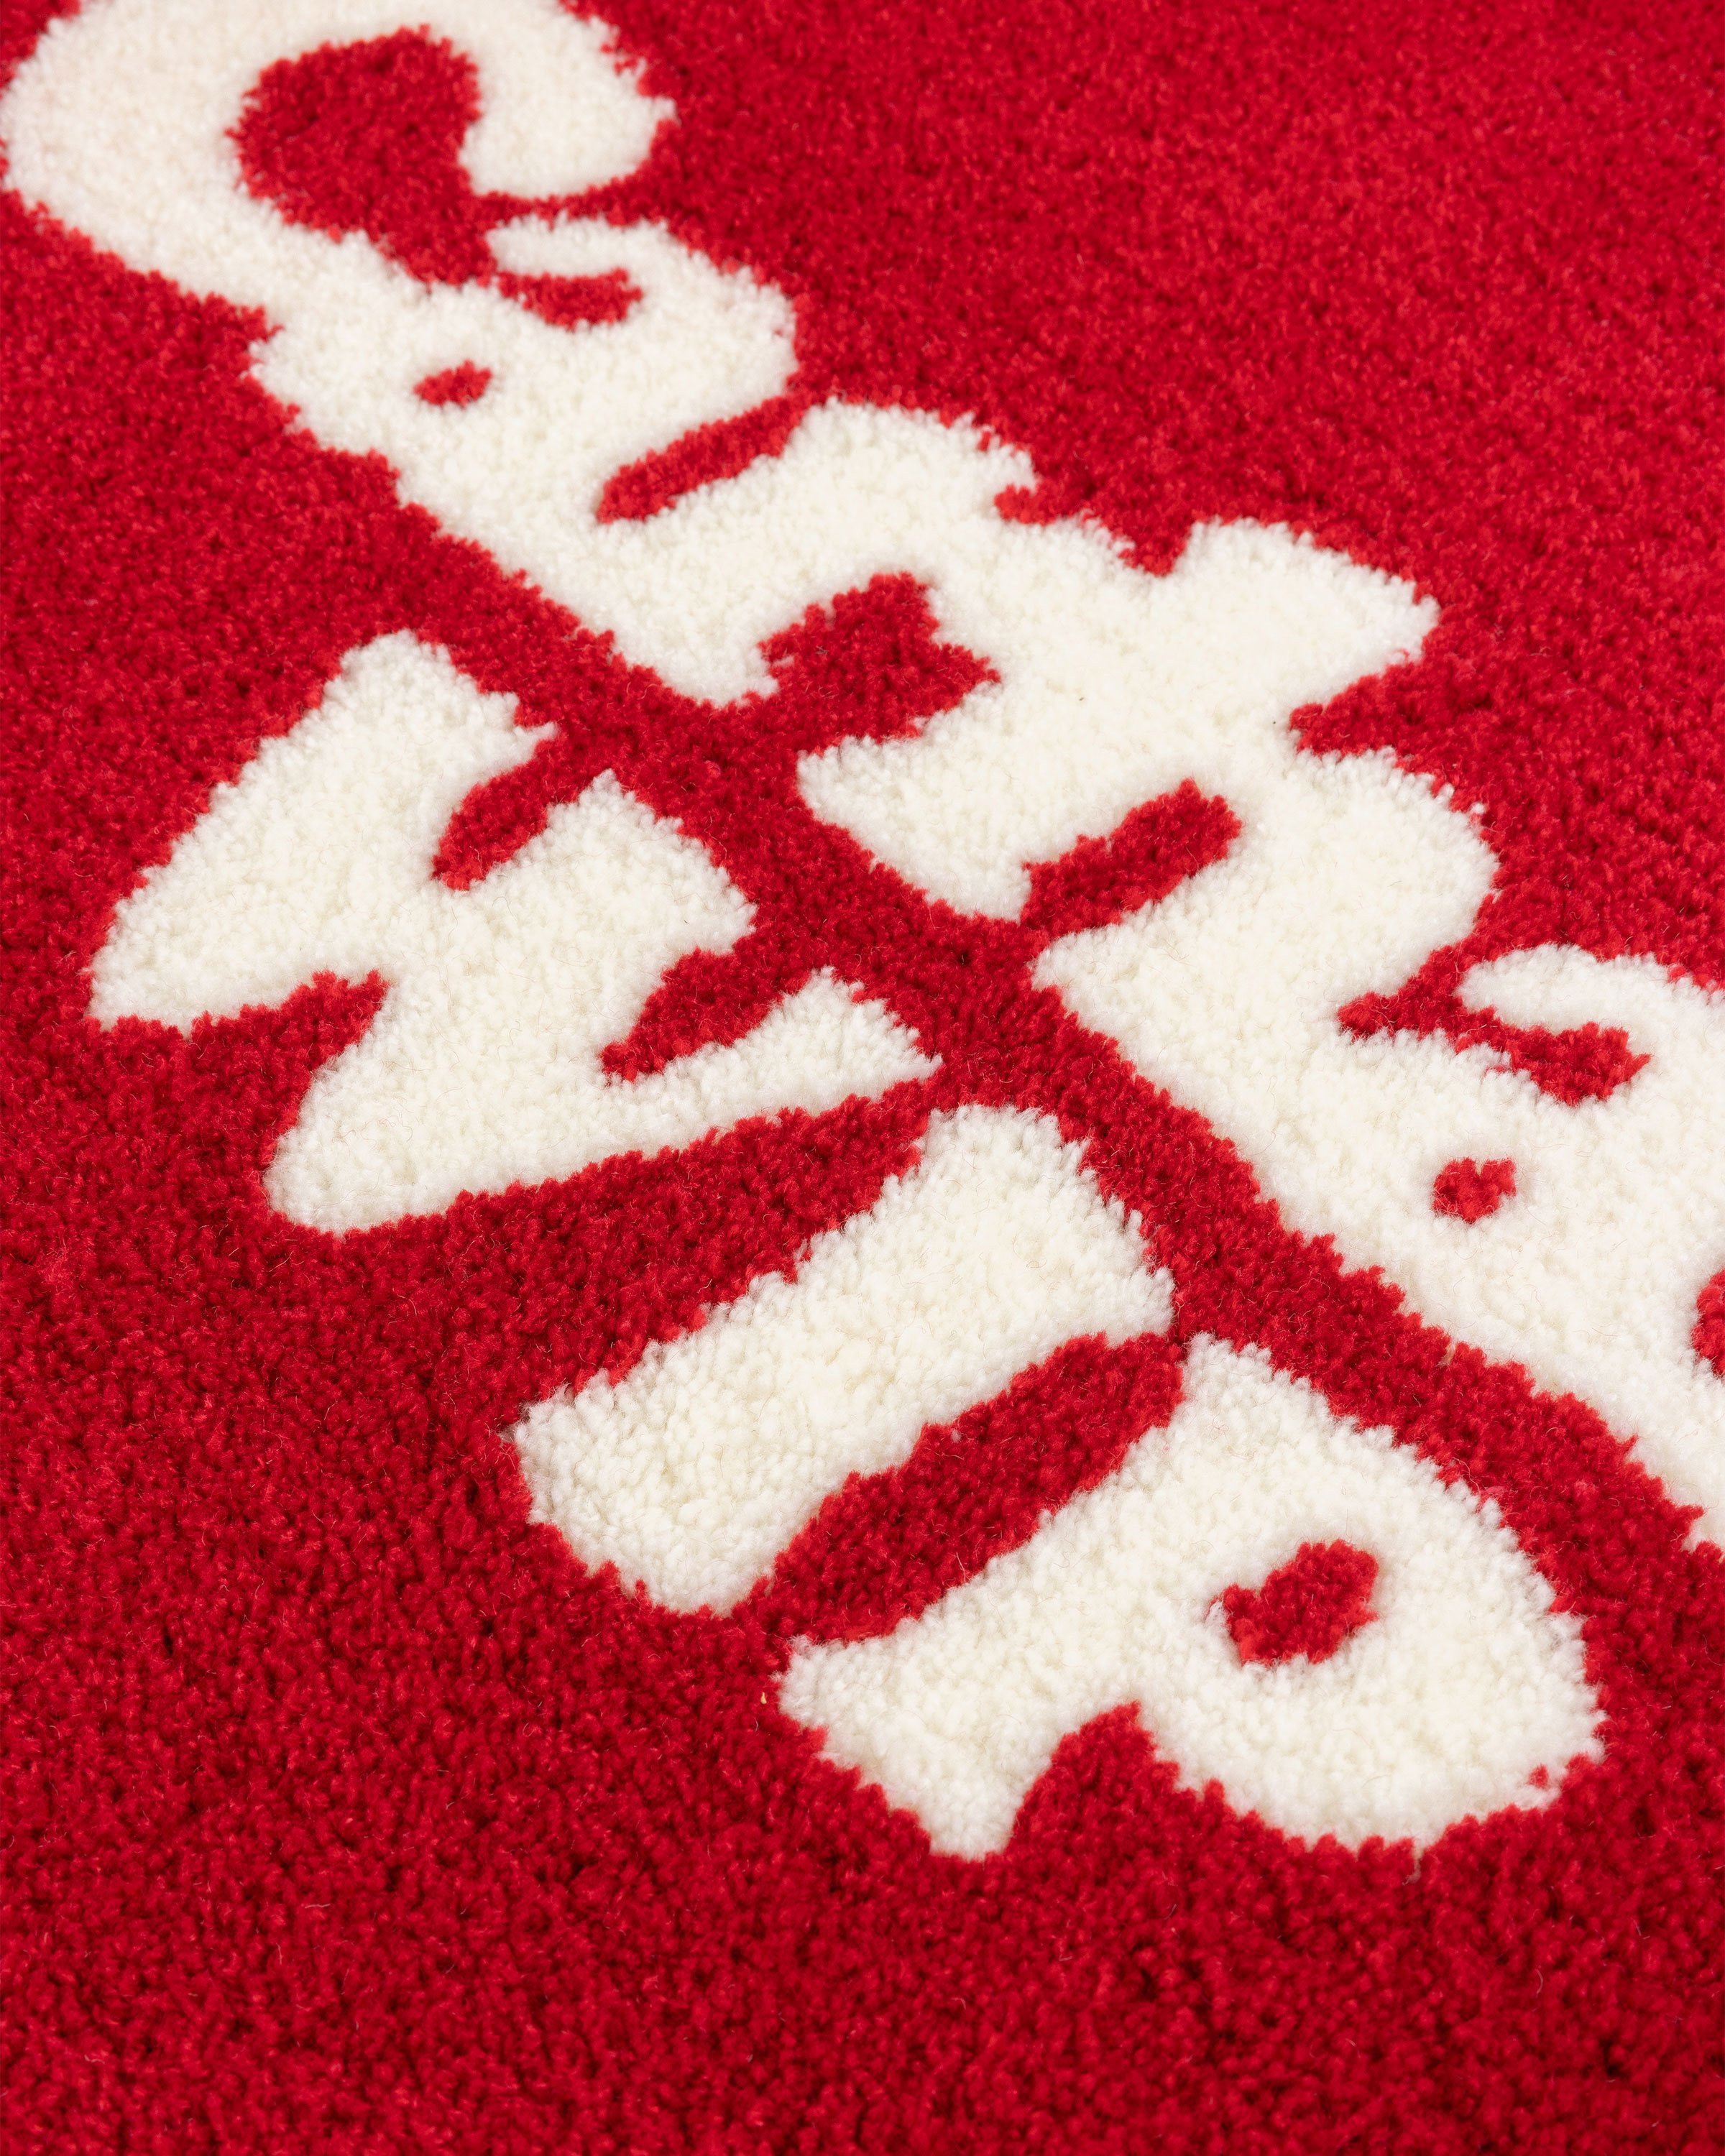 Carhartt WIP - Heart Rug Red - Lifestyle - Red - Image 2